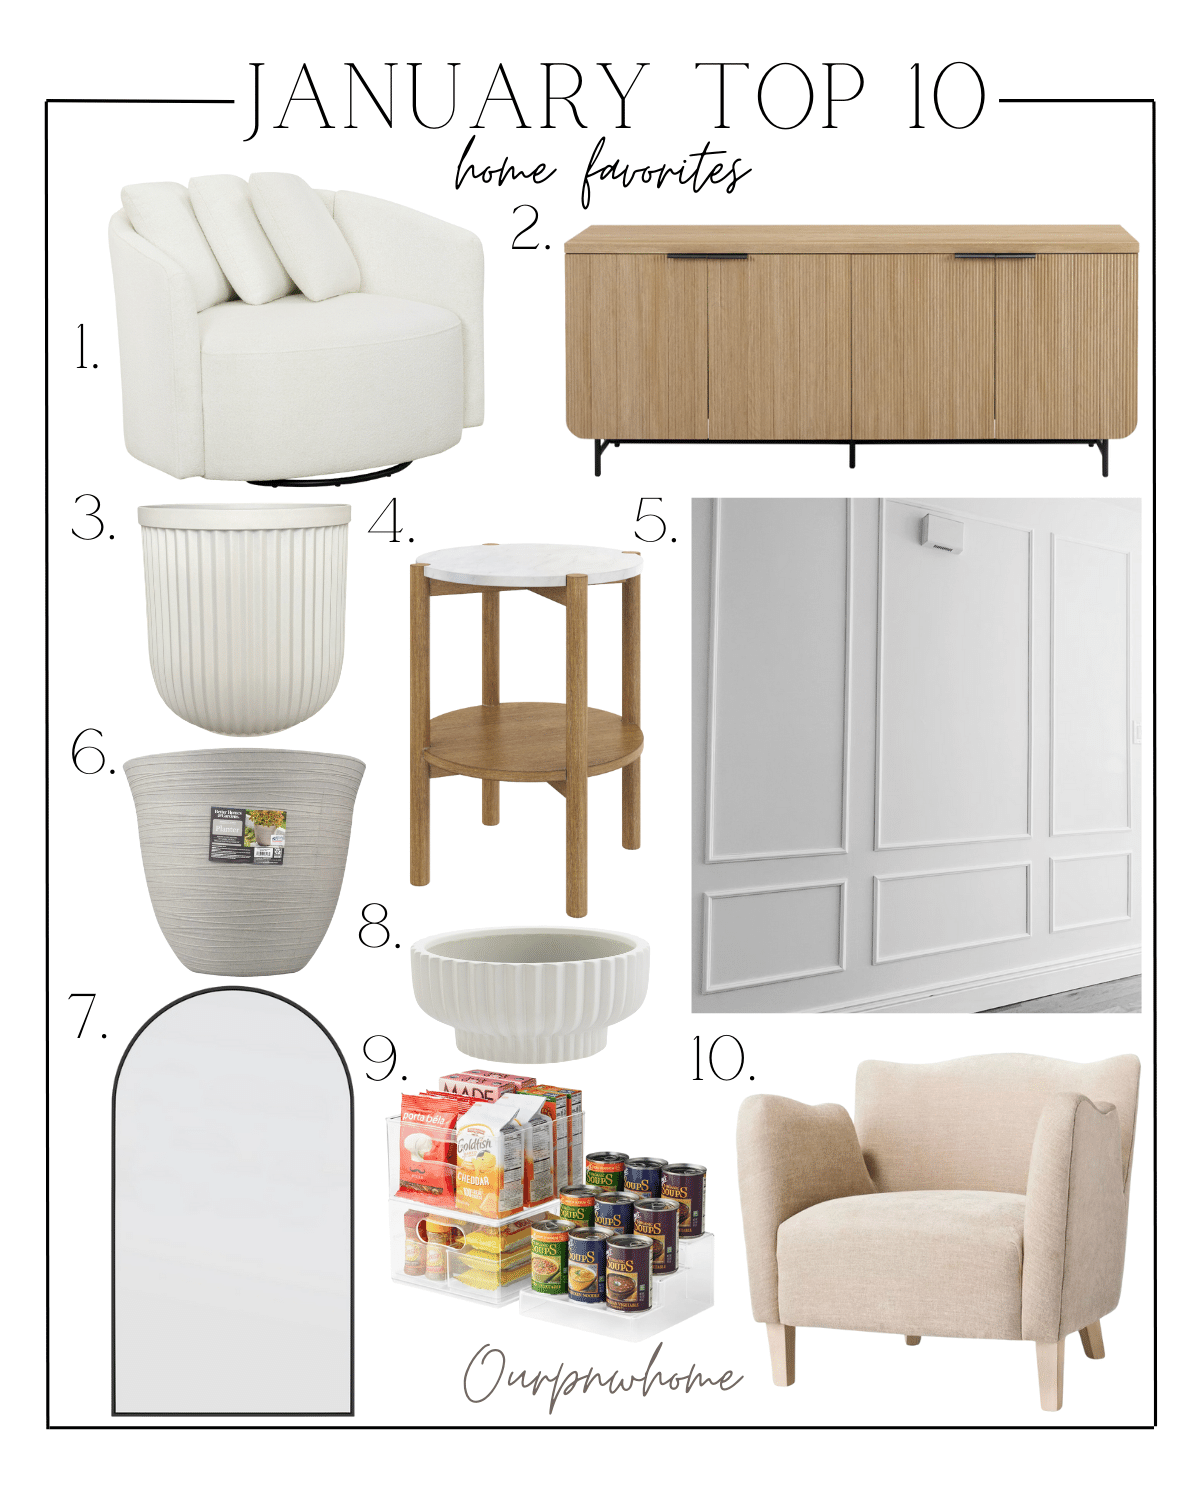 January top 10 best sellers | monthly top sellers, top selling, top sellers, January top 10, home blog, home blogger, neutral home decor, neutral home furniture, accent chair, console, planter, outdoor find, wall trim, end table, side table, arch mirror